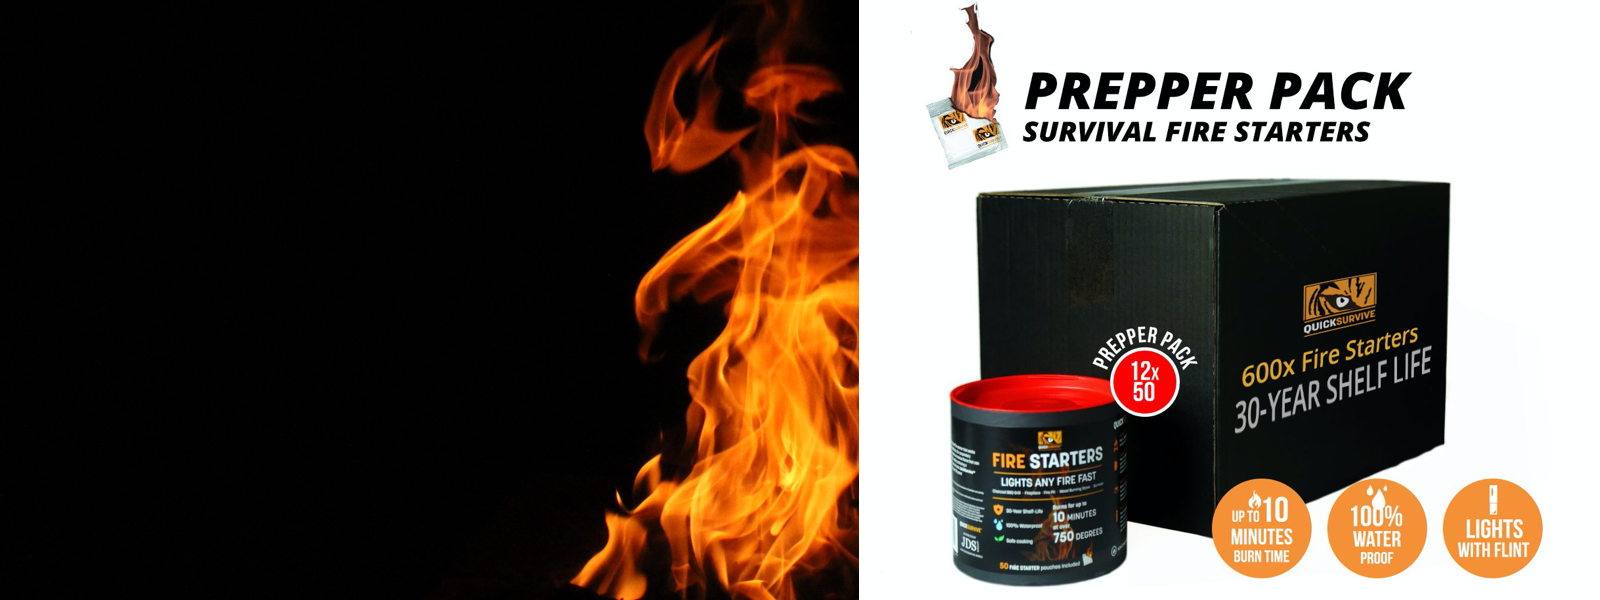 Fire Starter Dooms Day Prepper Pack With 600 Best Waterproof Fire Starters -  30 Year Shelf Life - Bunker and Survival Bug Out Bag Supplies - Essential Emergency Item